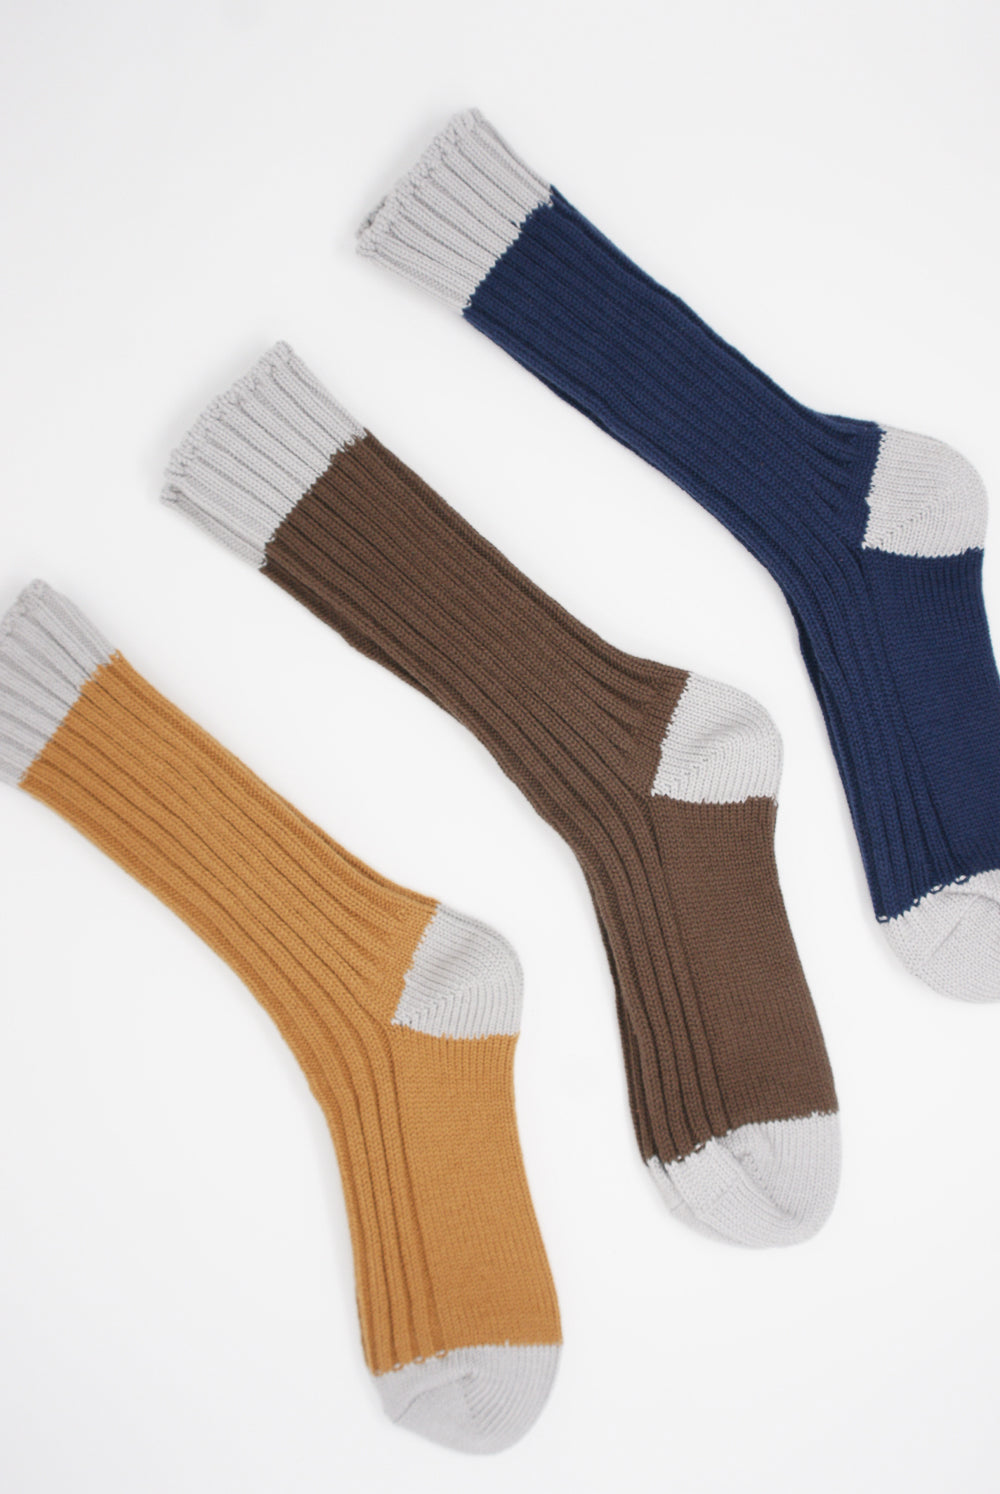 Ichi socks all colors group view